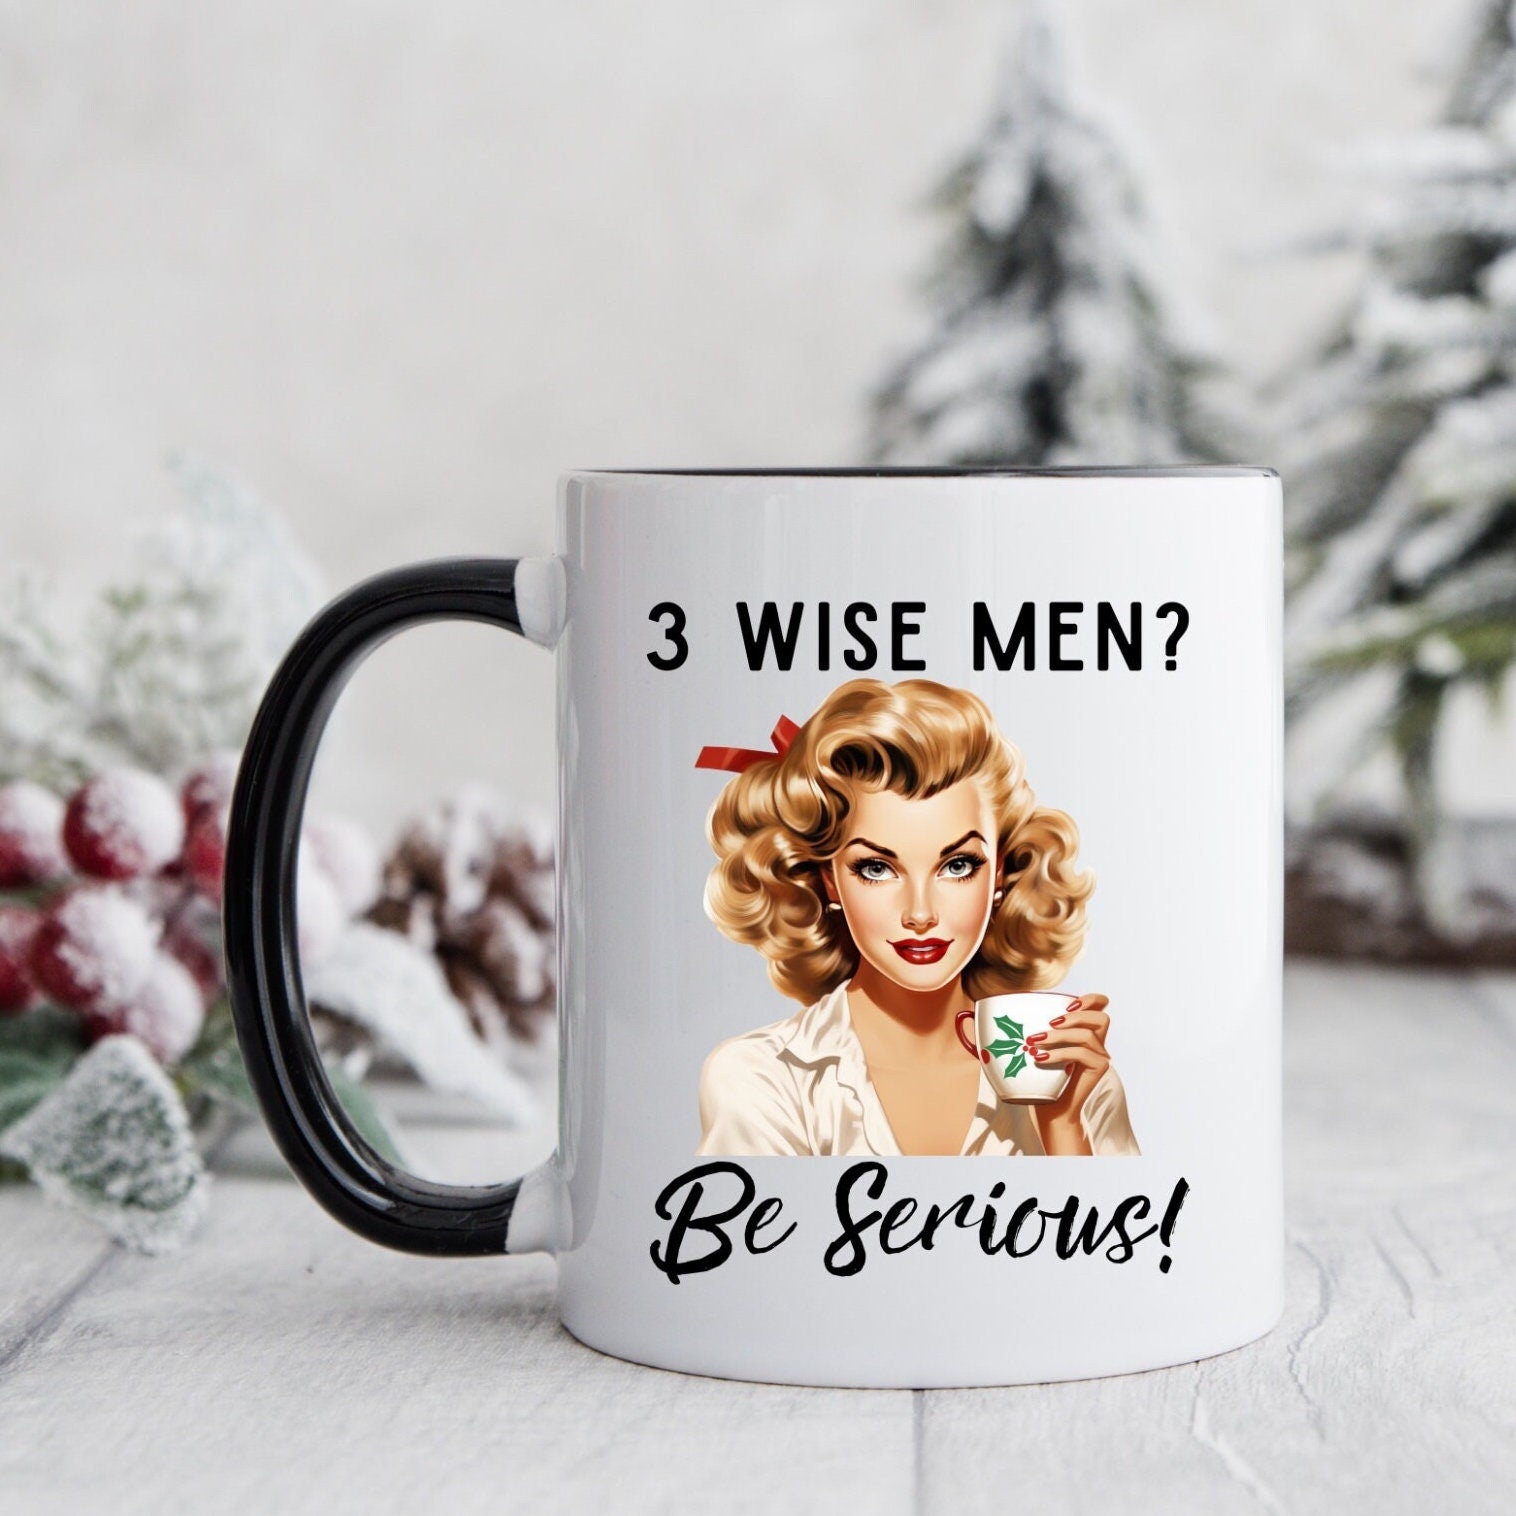 3 Wise Men Be Serious Coffee Mug, Christmas Party, 11 oz Coffee Mug, Funny Coffee Mug, Tea Mug, Pink Christmas, Birthday, Gift for Her